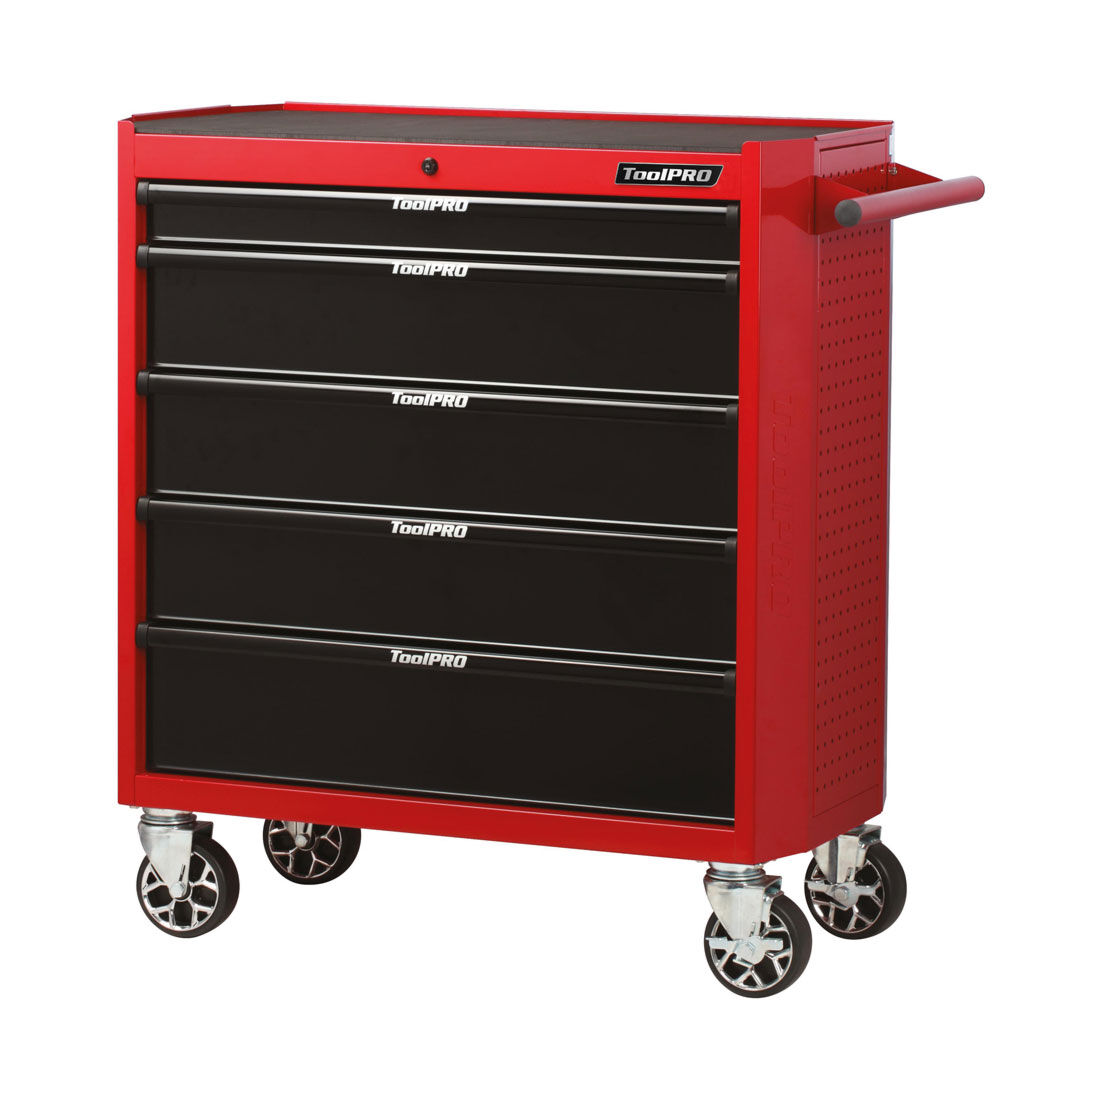 133 US PRO Red Mechanics tool chest tool box roller tool cabinet 9 Drawers  on ball bearing slides